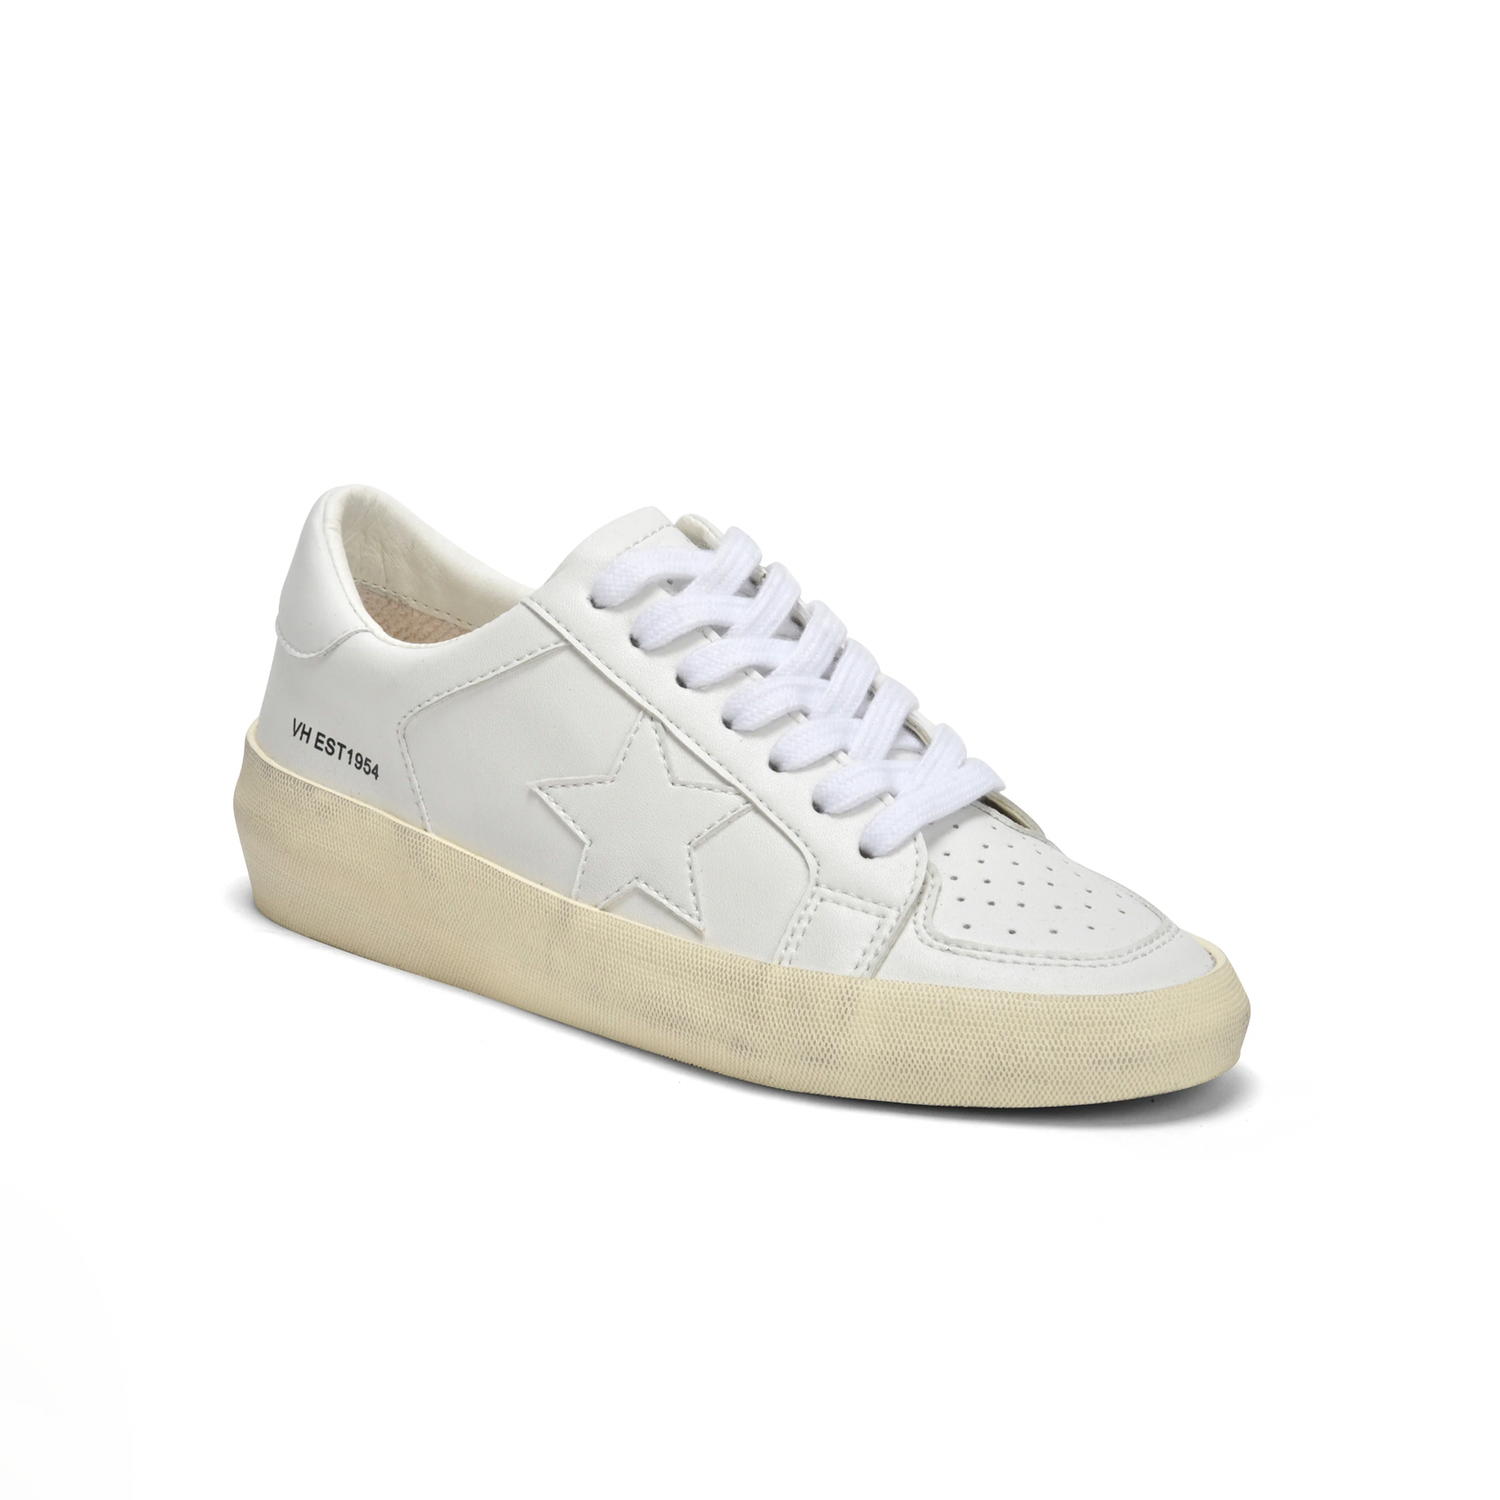 Vintage Havana White On White Star Sneaker. Retro and modern collide in this Vintage Havana sneaker. This fun shoe features an all white look with a cool star. Leather and mesh upper No tie laces for easy slip-on wear Padded heel for added comfort